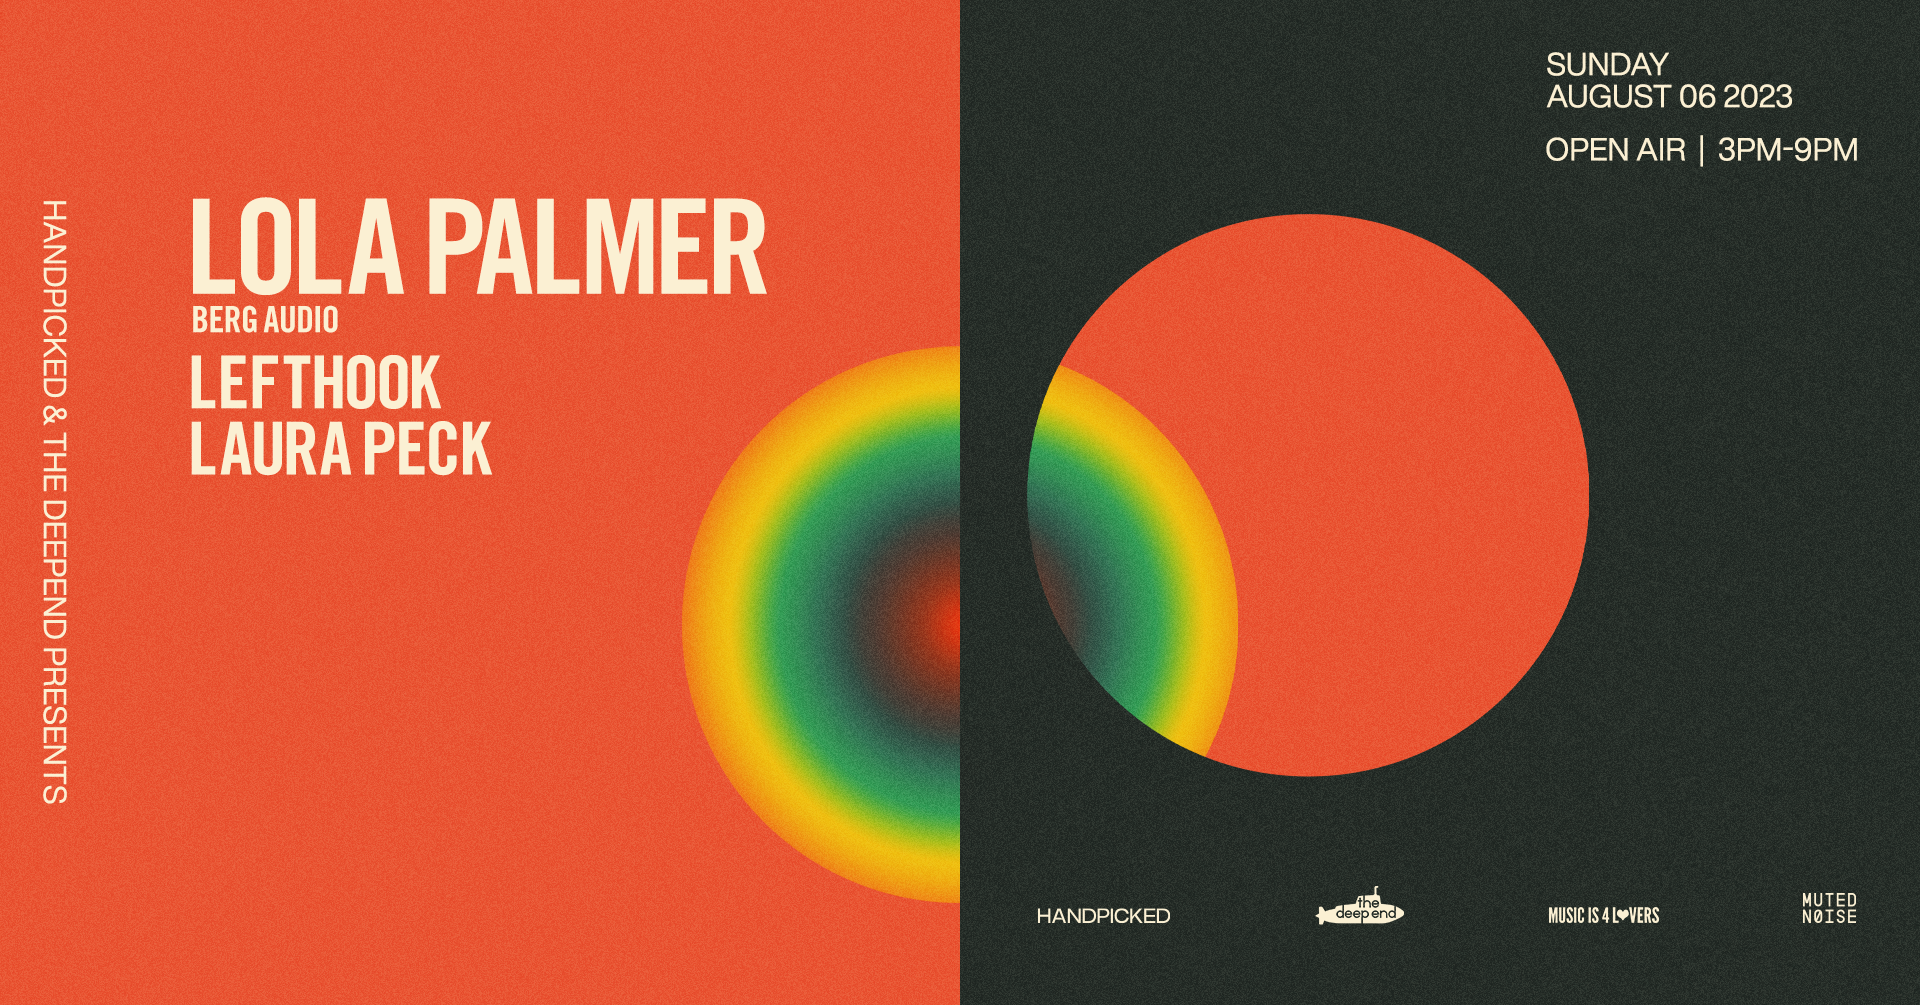 Handpicked x The Deep End presents..Lola Palmer w/ Lefthook, Laura Peck - フライヤー表